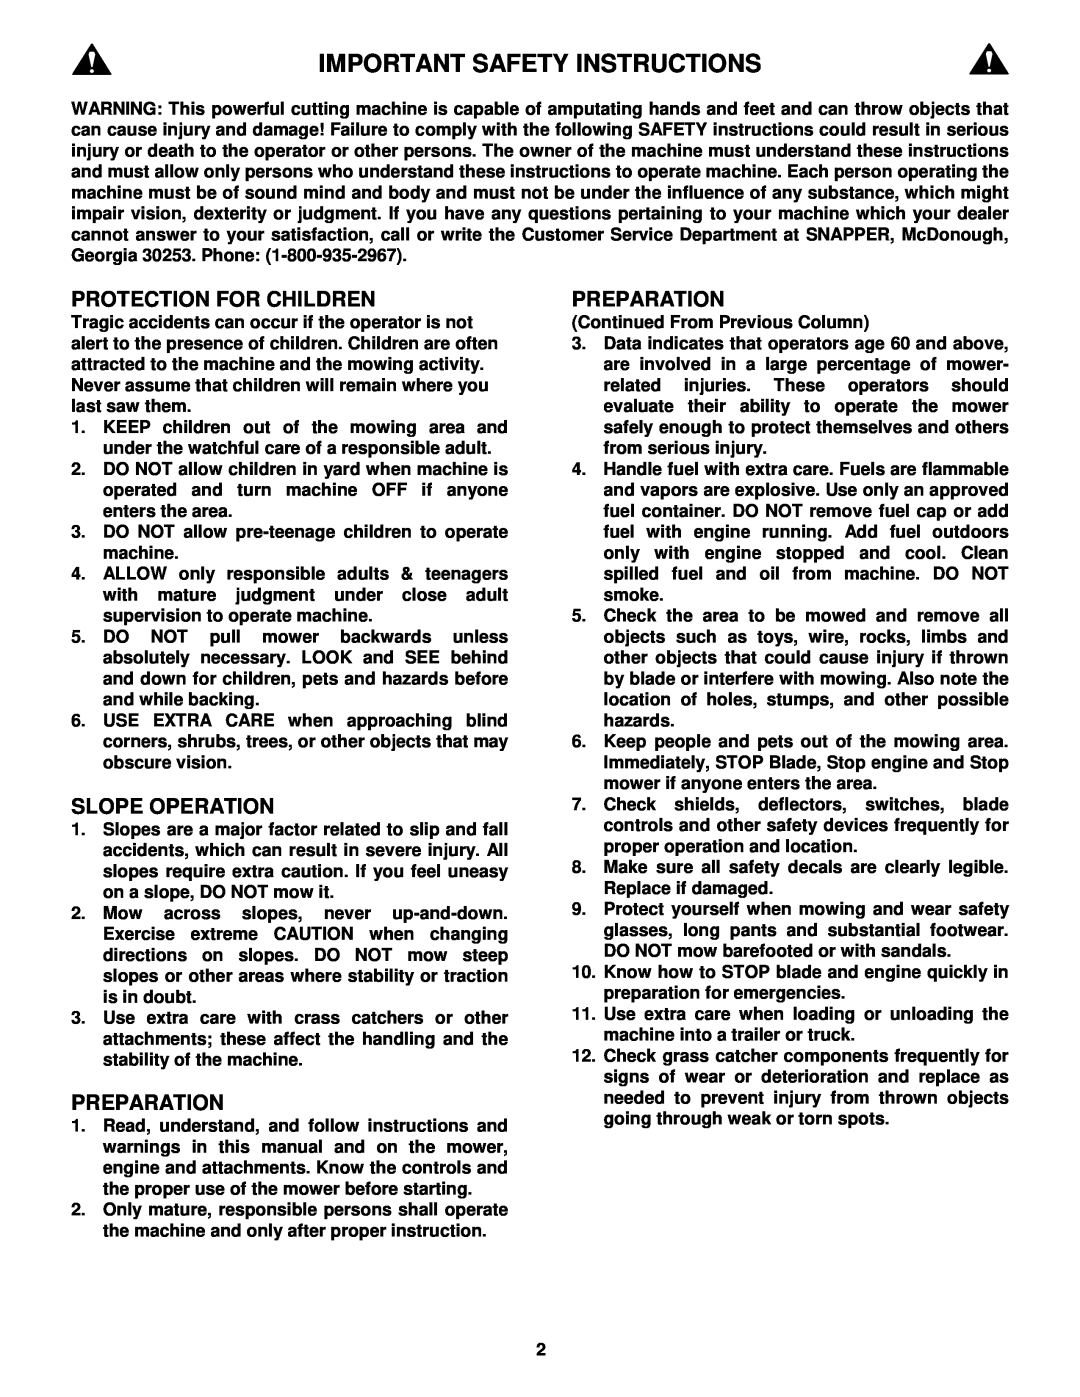 Snapper P216012E Important Safety Instructions, Protection For Children, Slope Operation, Preparation 